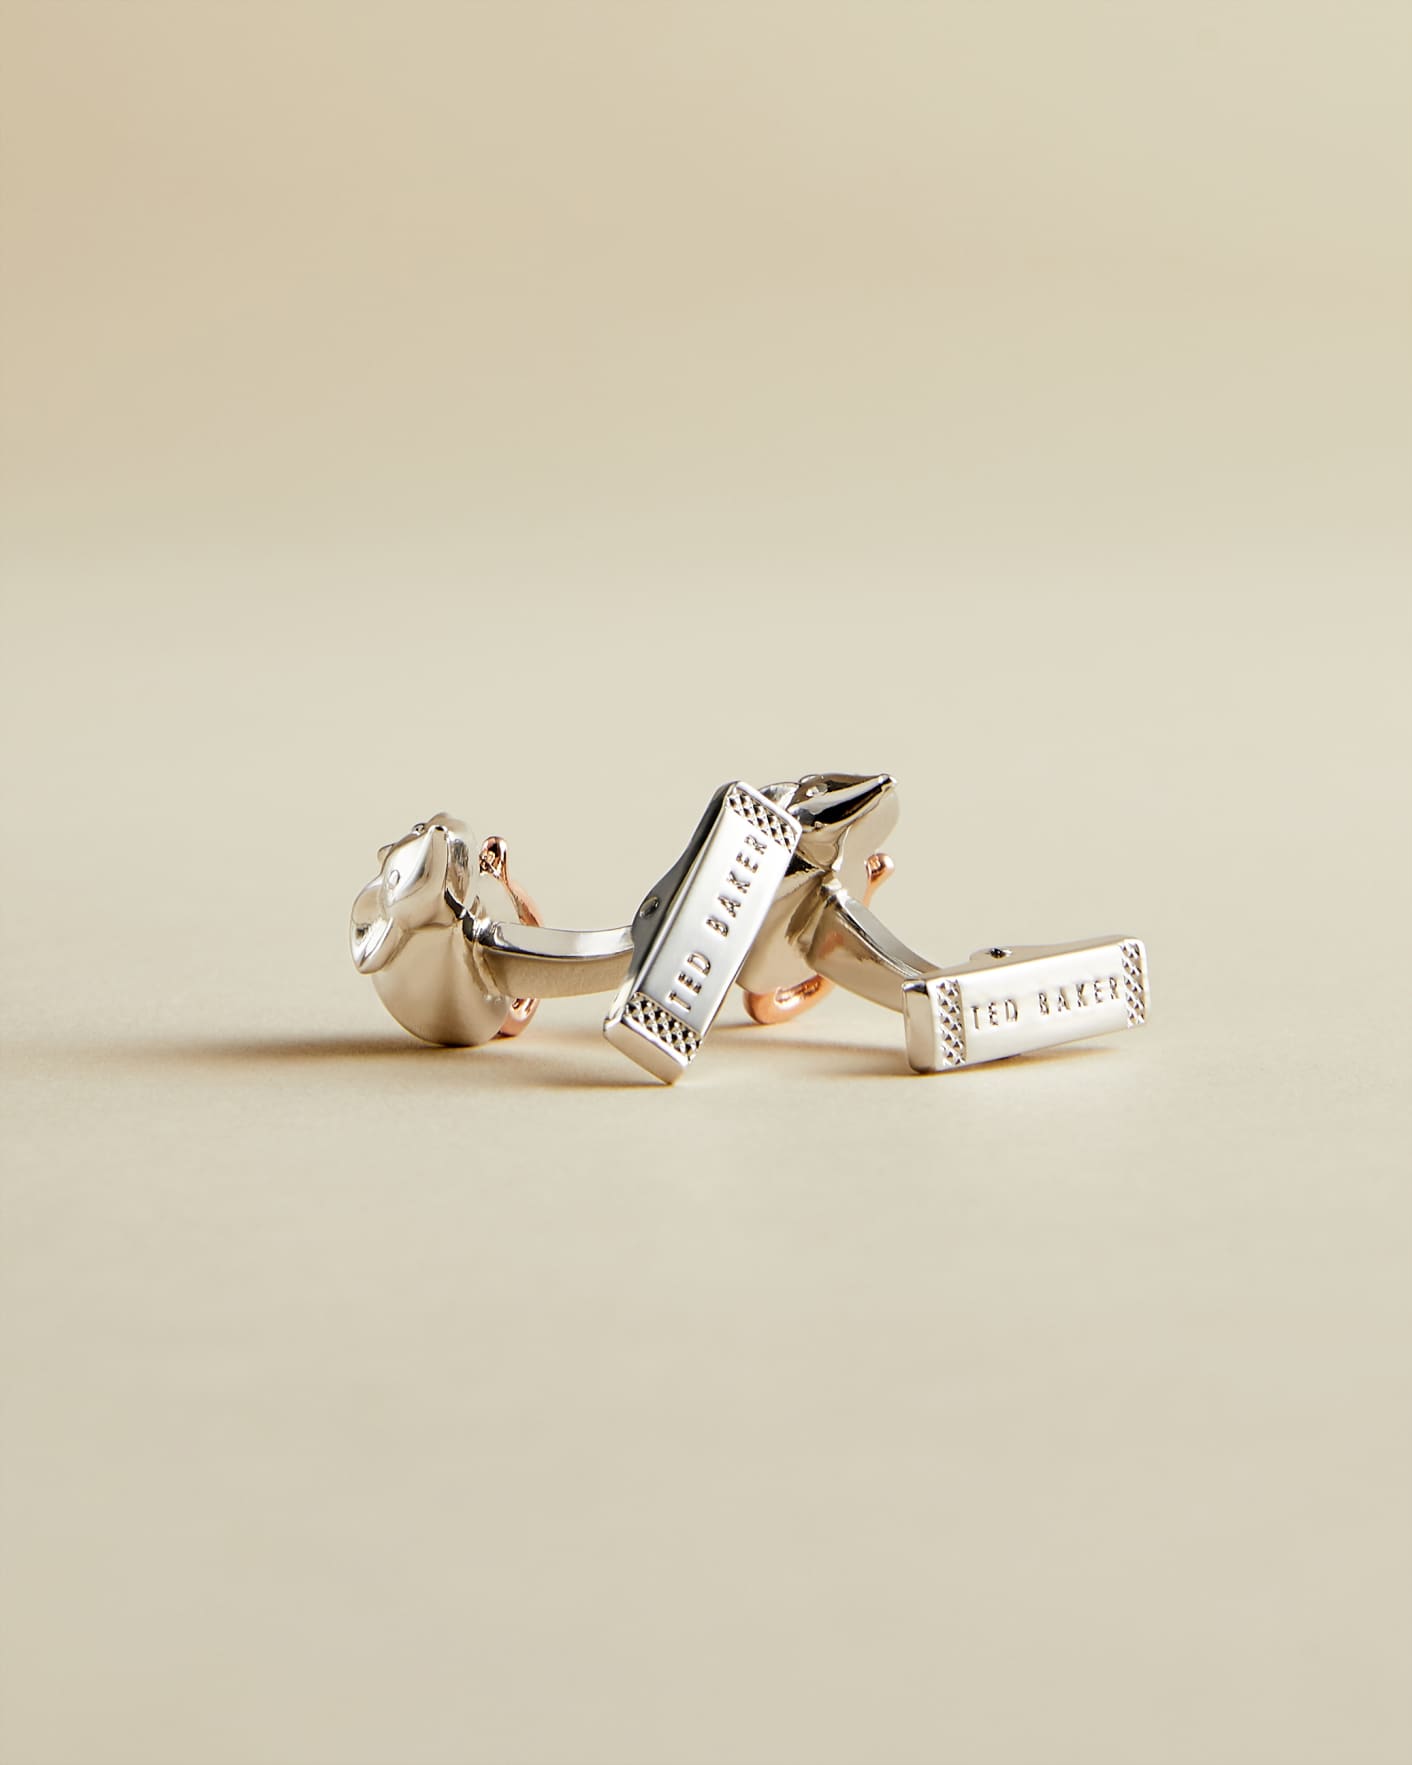 Silver Color Mouse cufflinks Ted Baker